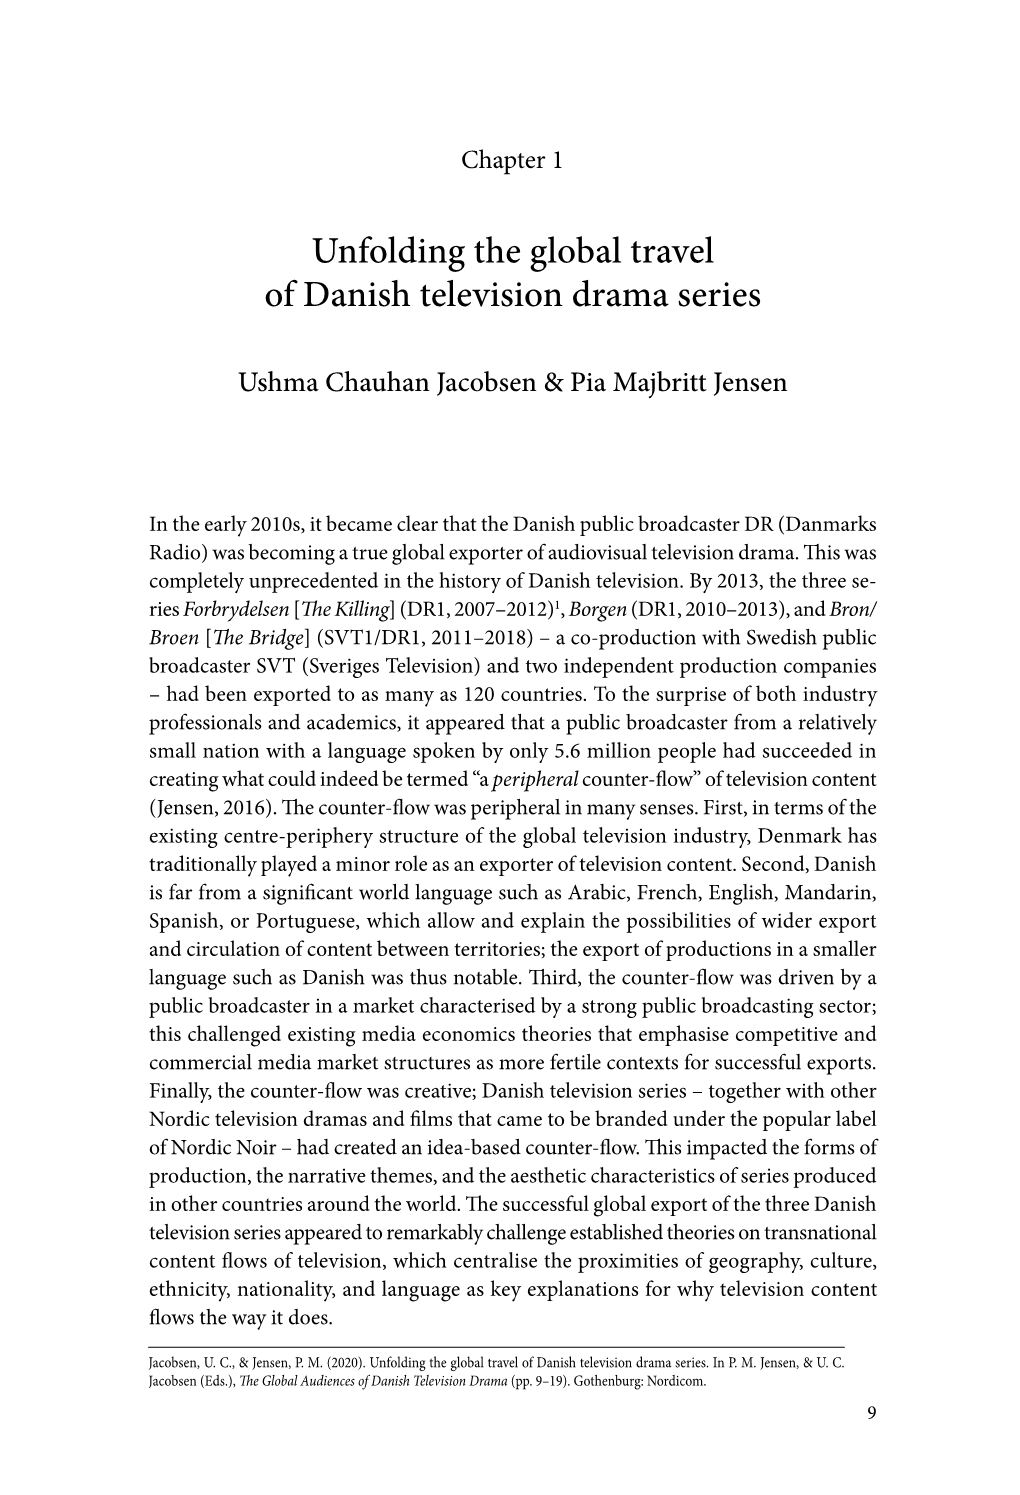 Unfolding the Global Travel of Danish Television Drama Series